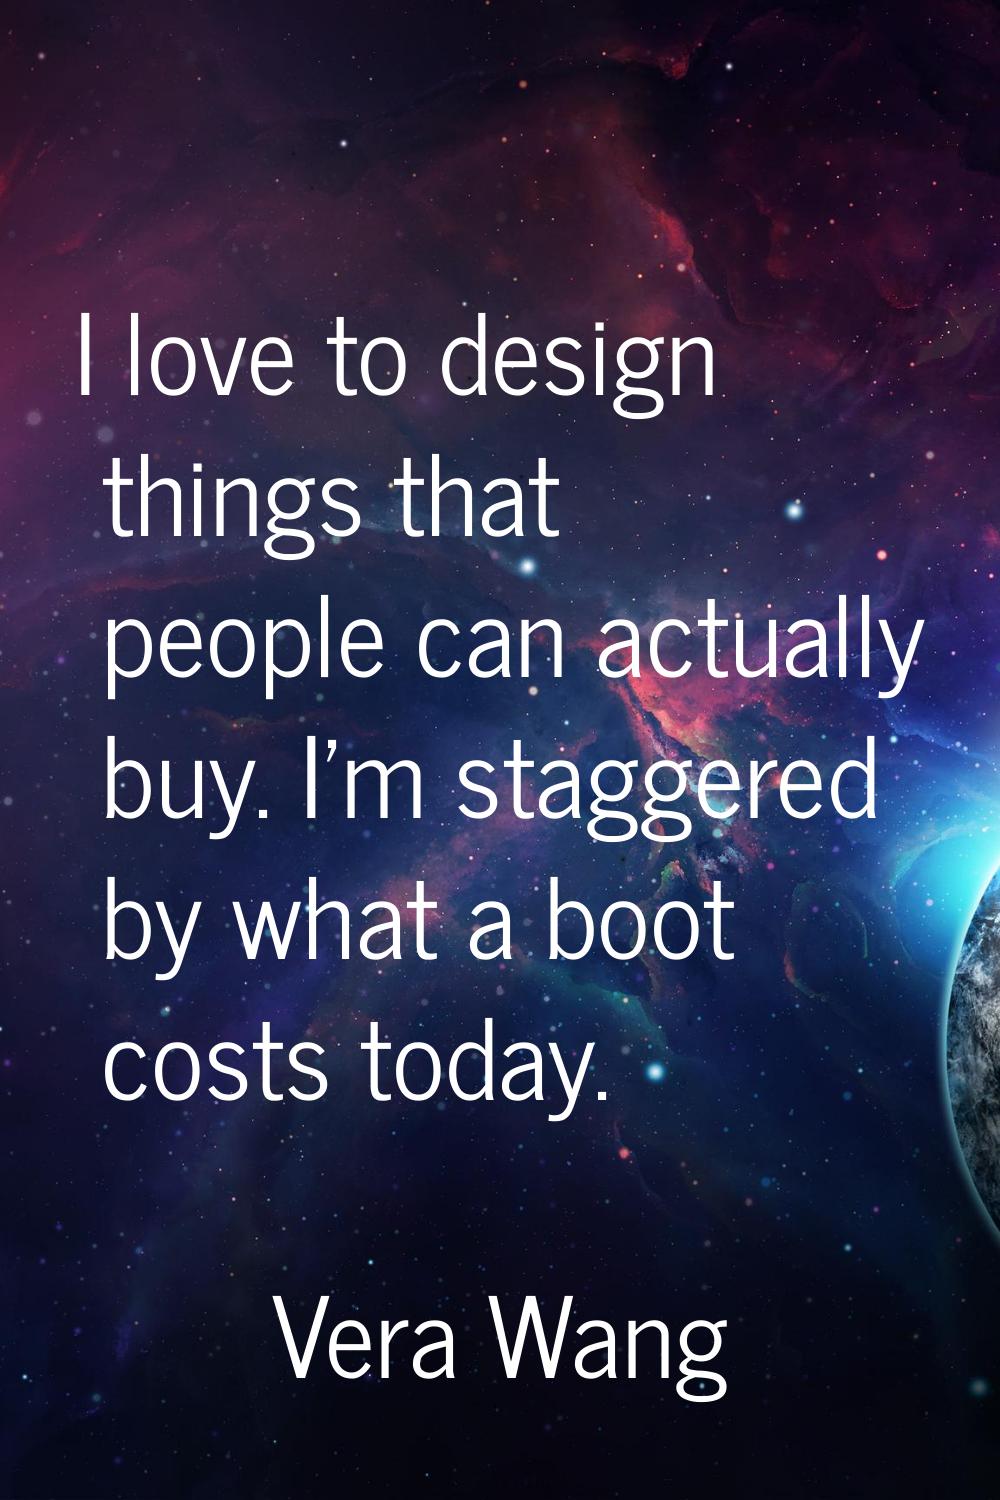 I love to design things that people can actually buy. I'm staggered by what a boot costs today.